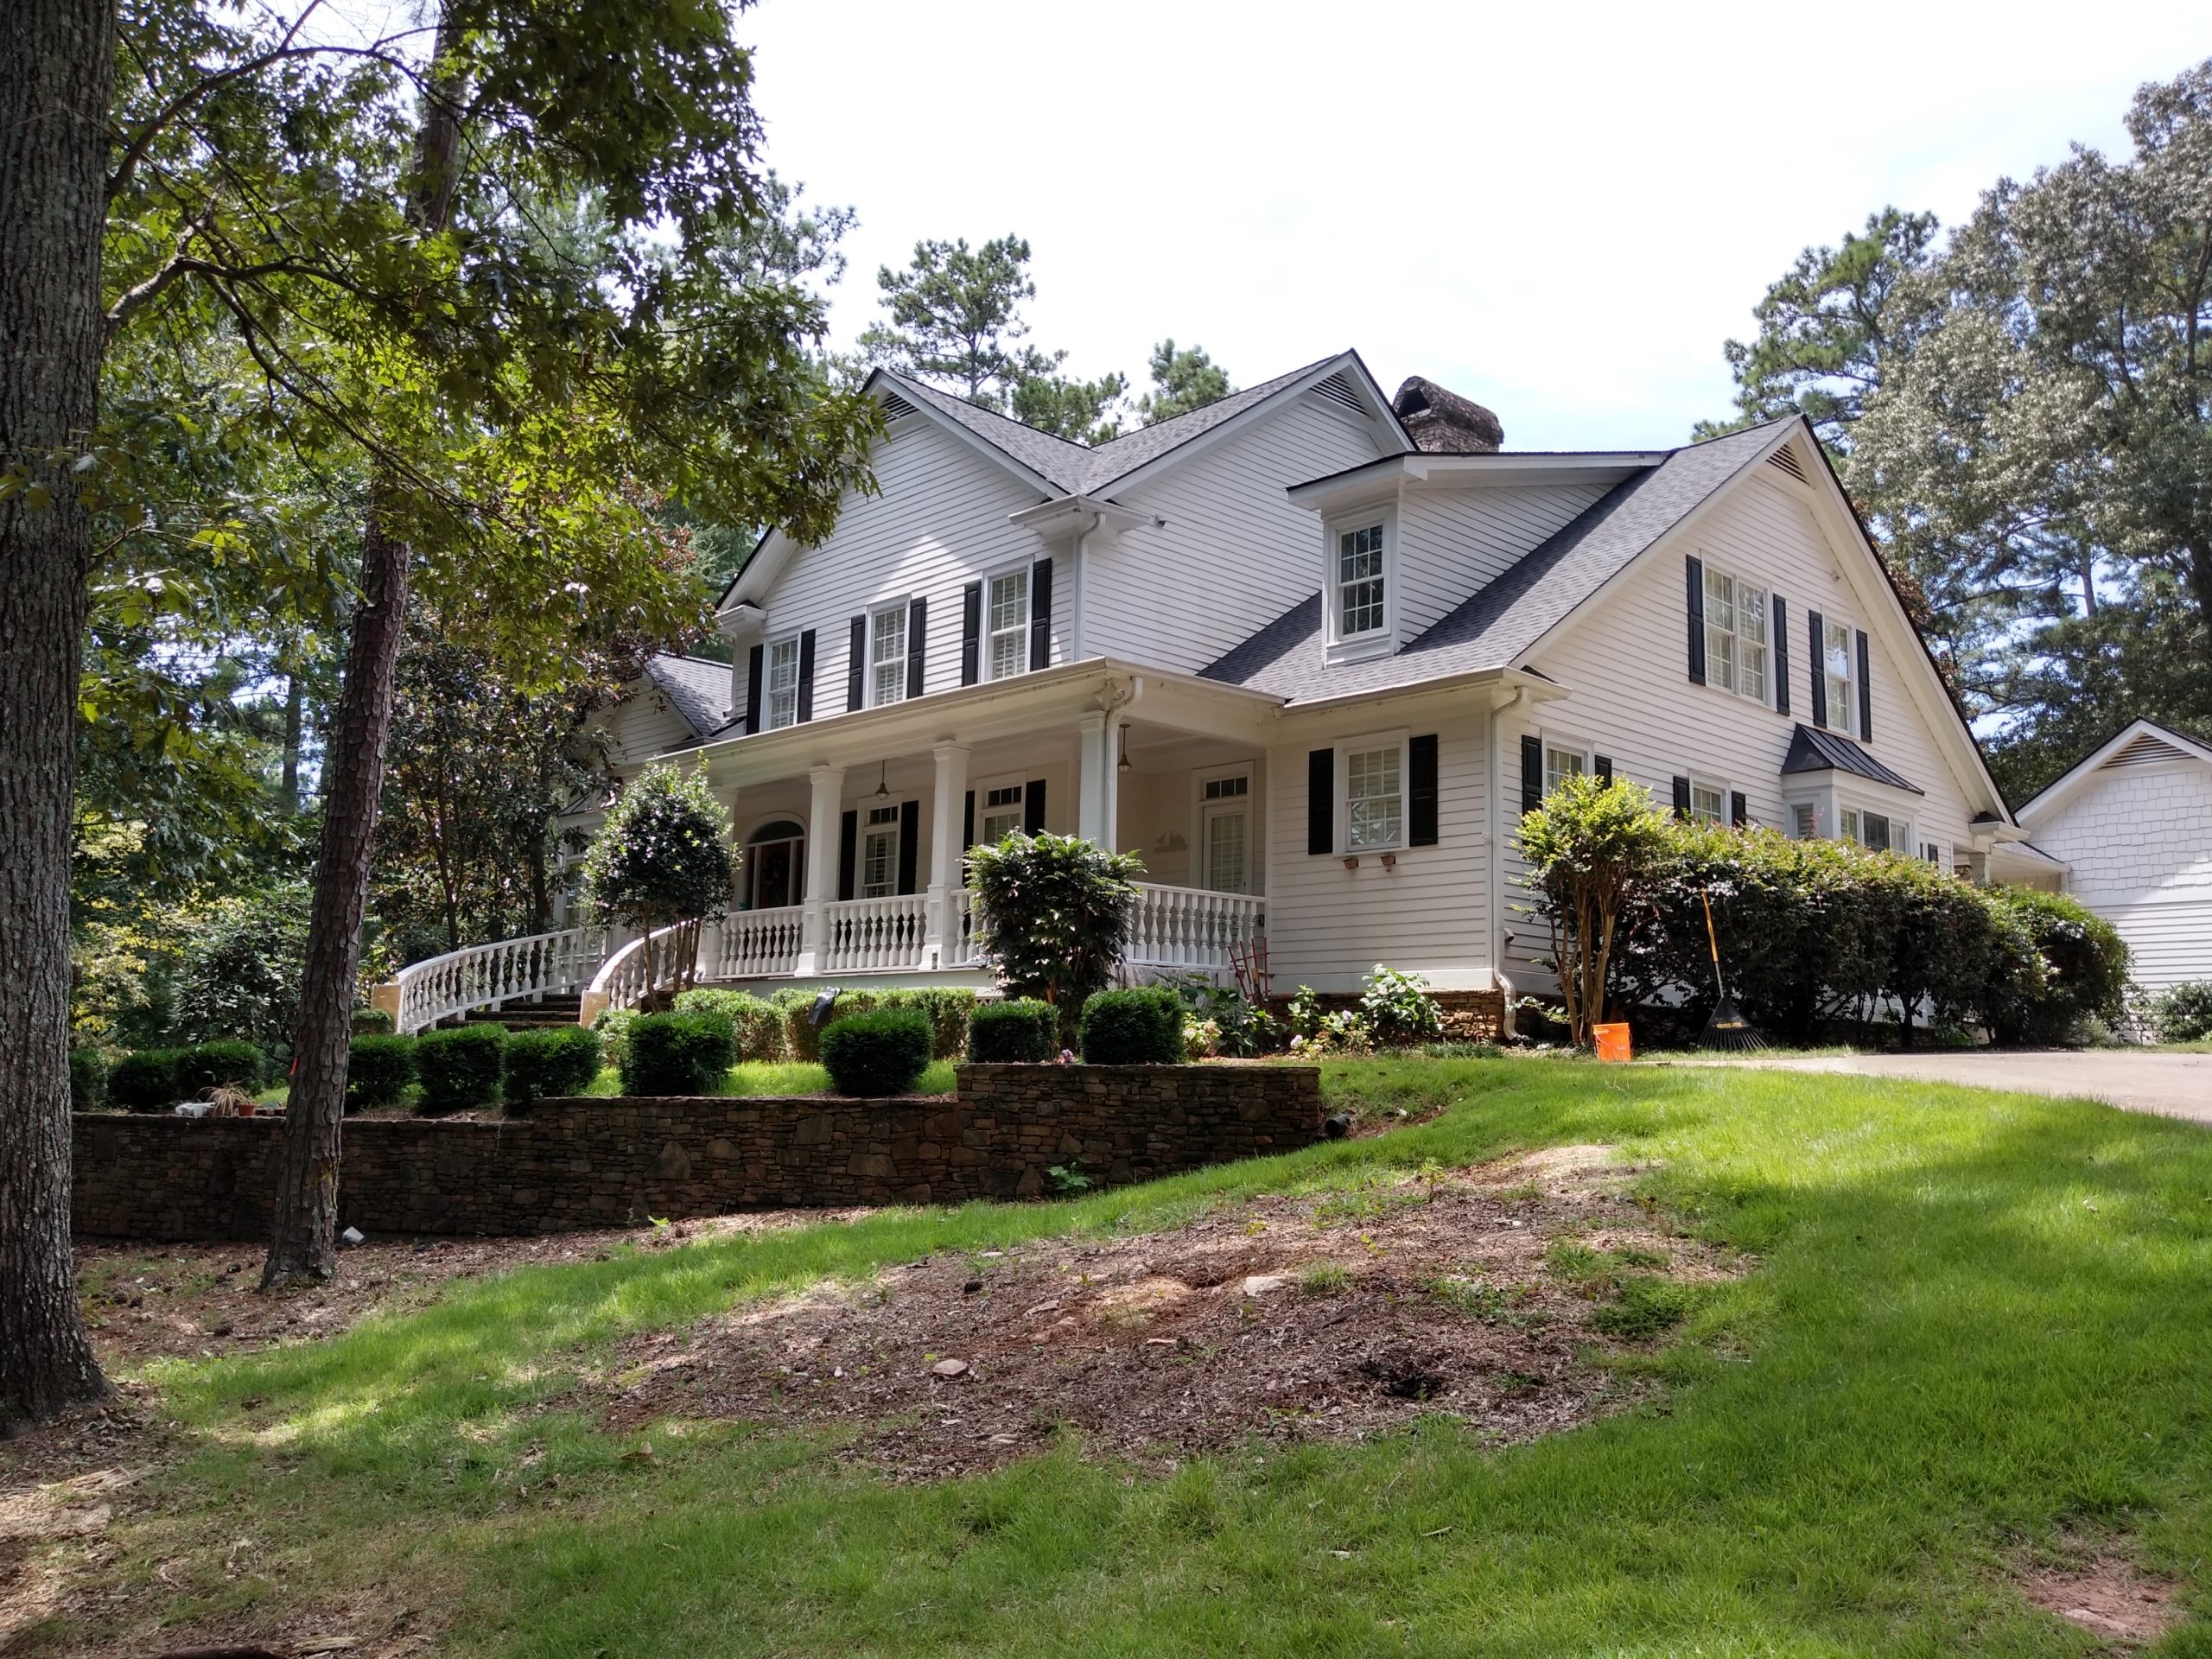 Get Professional Recommendations and High-Quality Products and Services from Alpharetta’s Top Roofing Contractor, SSR Roofing